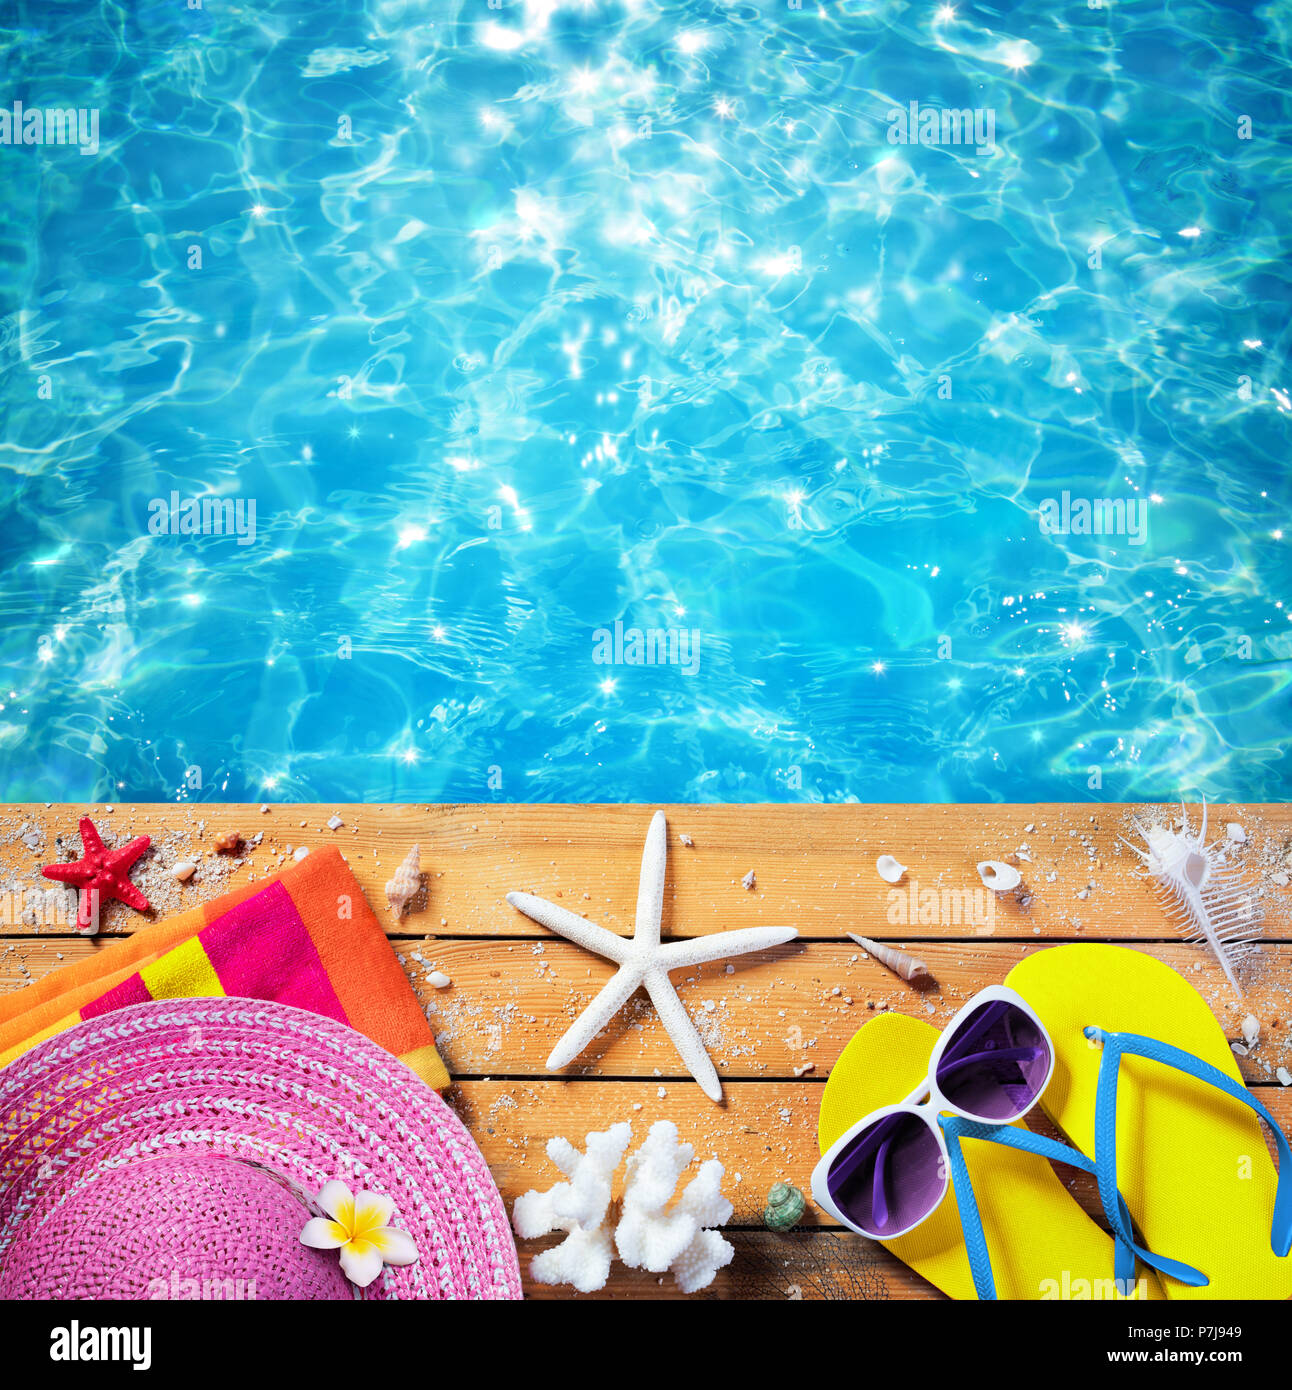 Summer Vacation - Beach Accessories With Pool background Stock Photo